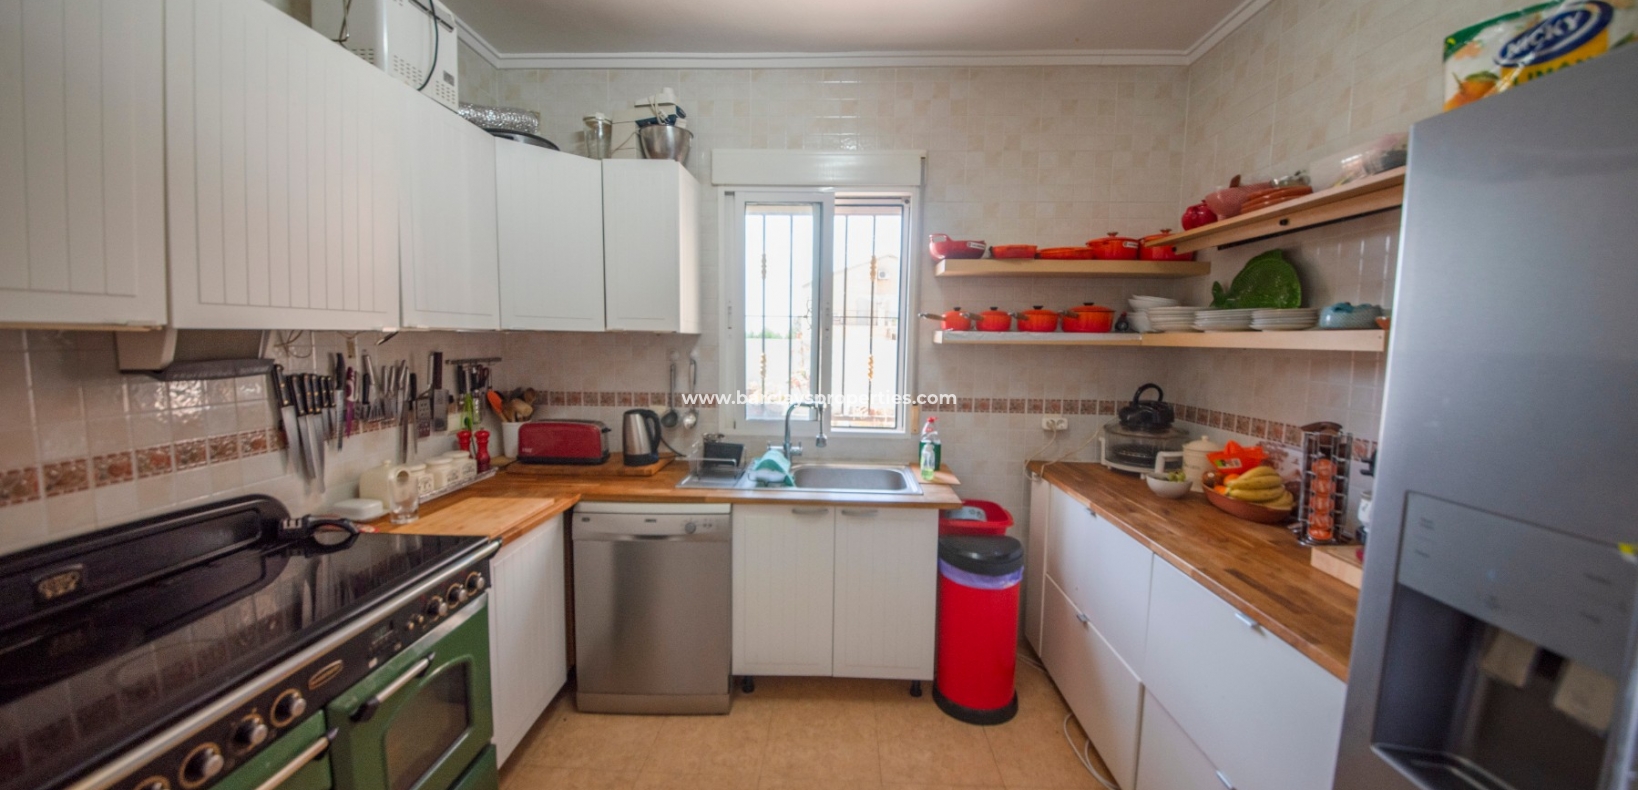 Kitchen - Country House For Sale in Catral, Spain